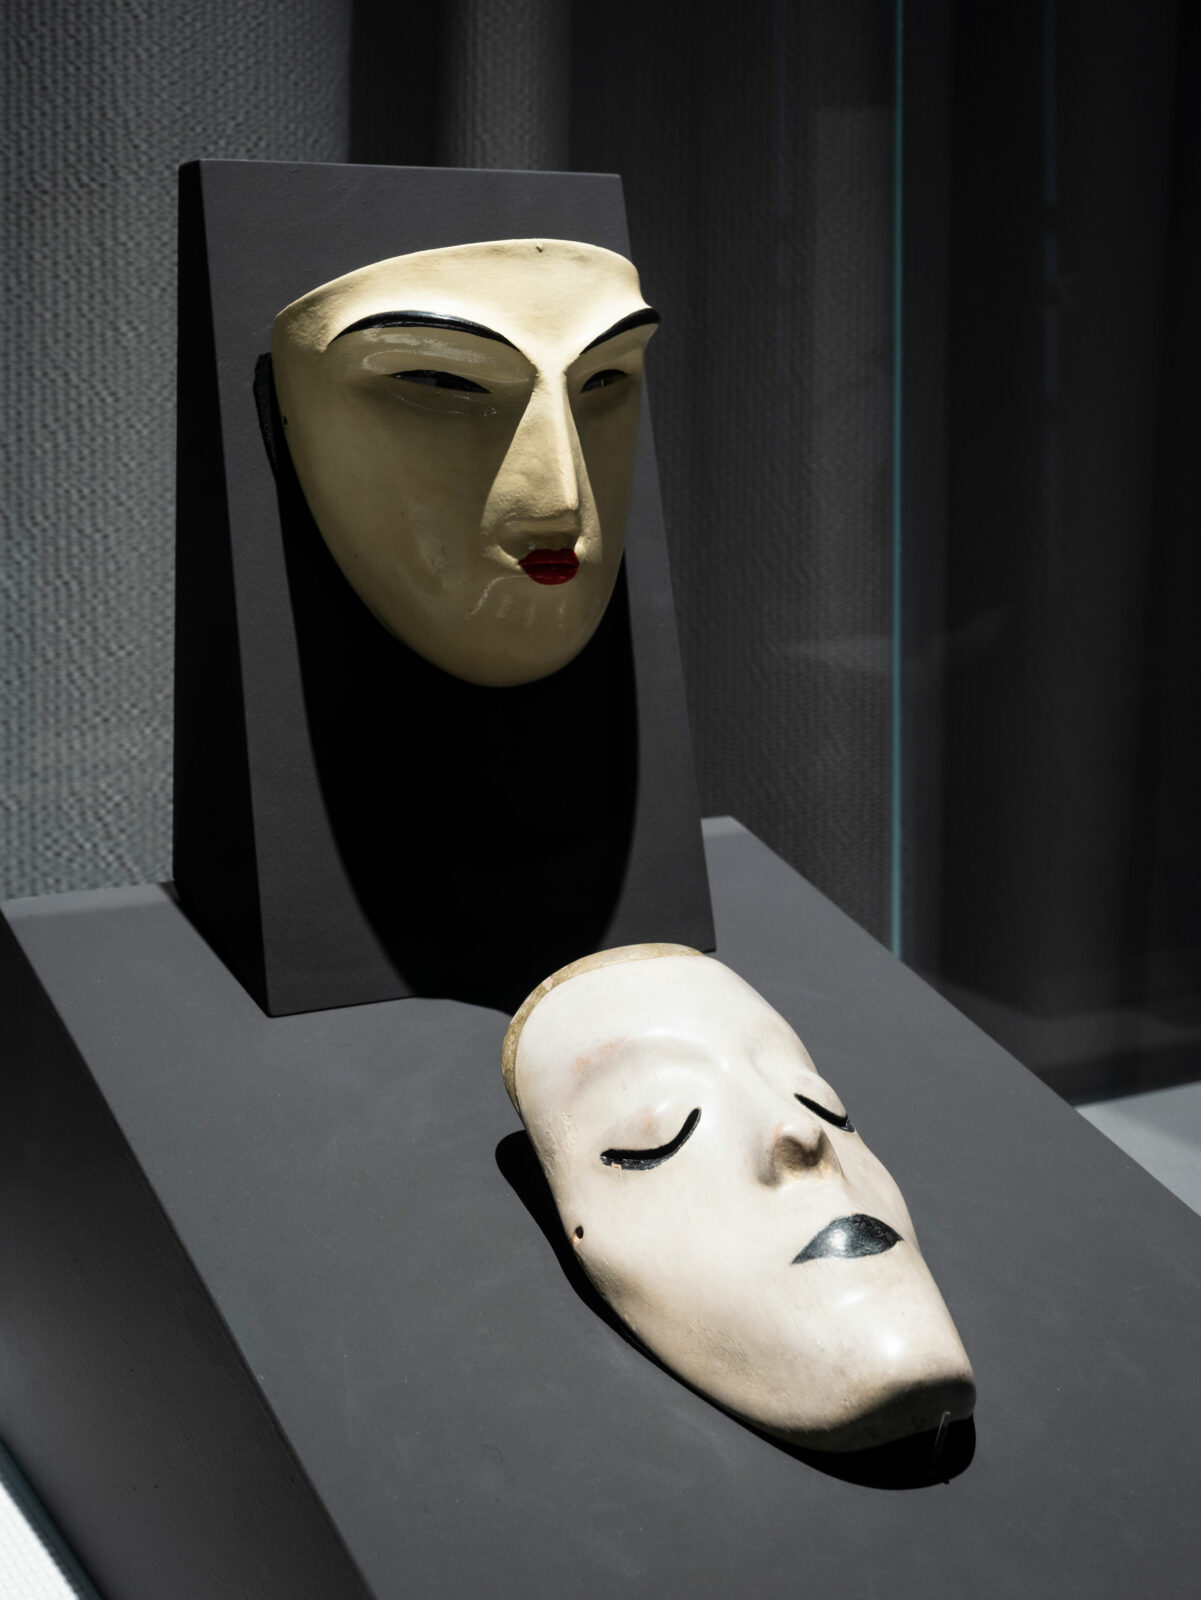 Two white masks with strongly drawn contours around the eyes and mouth in a display case - one hanging, the other lying down.